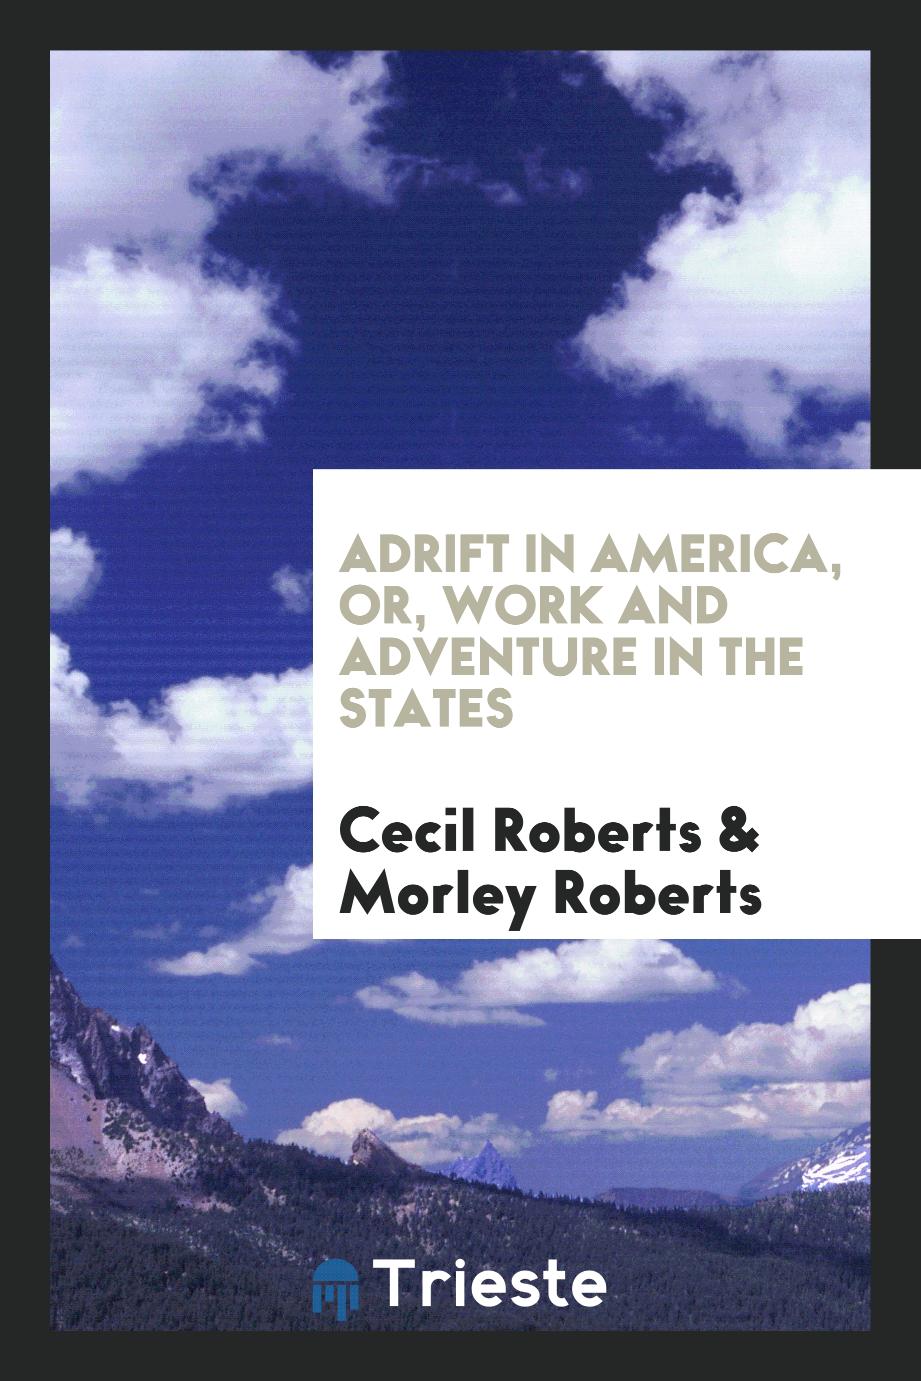 Adrift in America, or, Work and adventure in the States